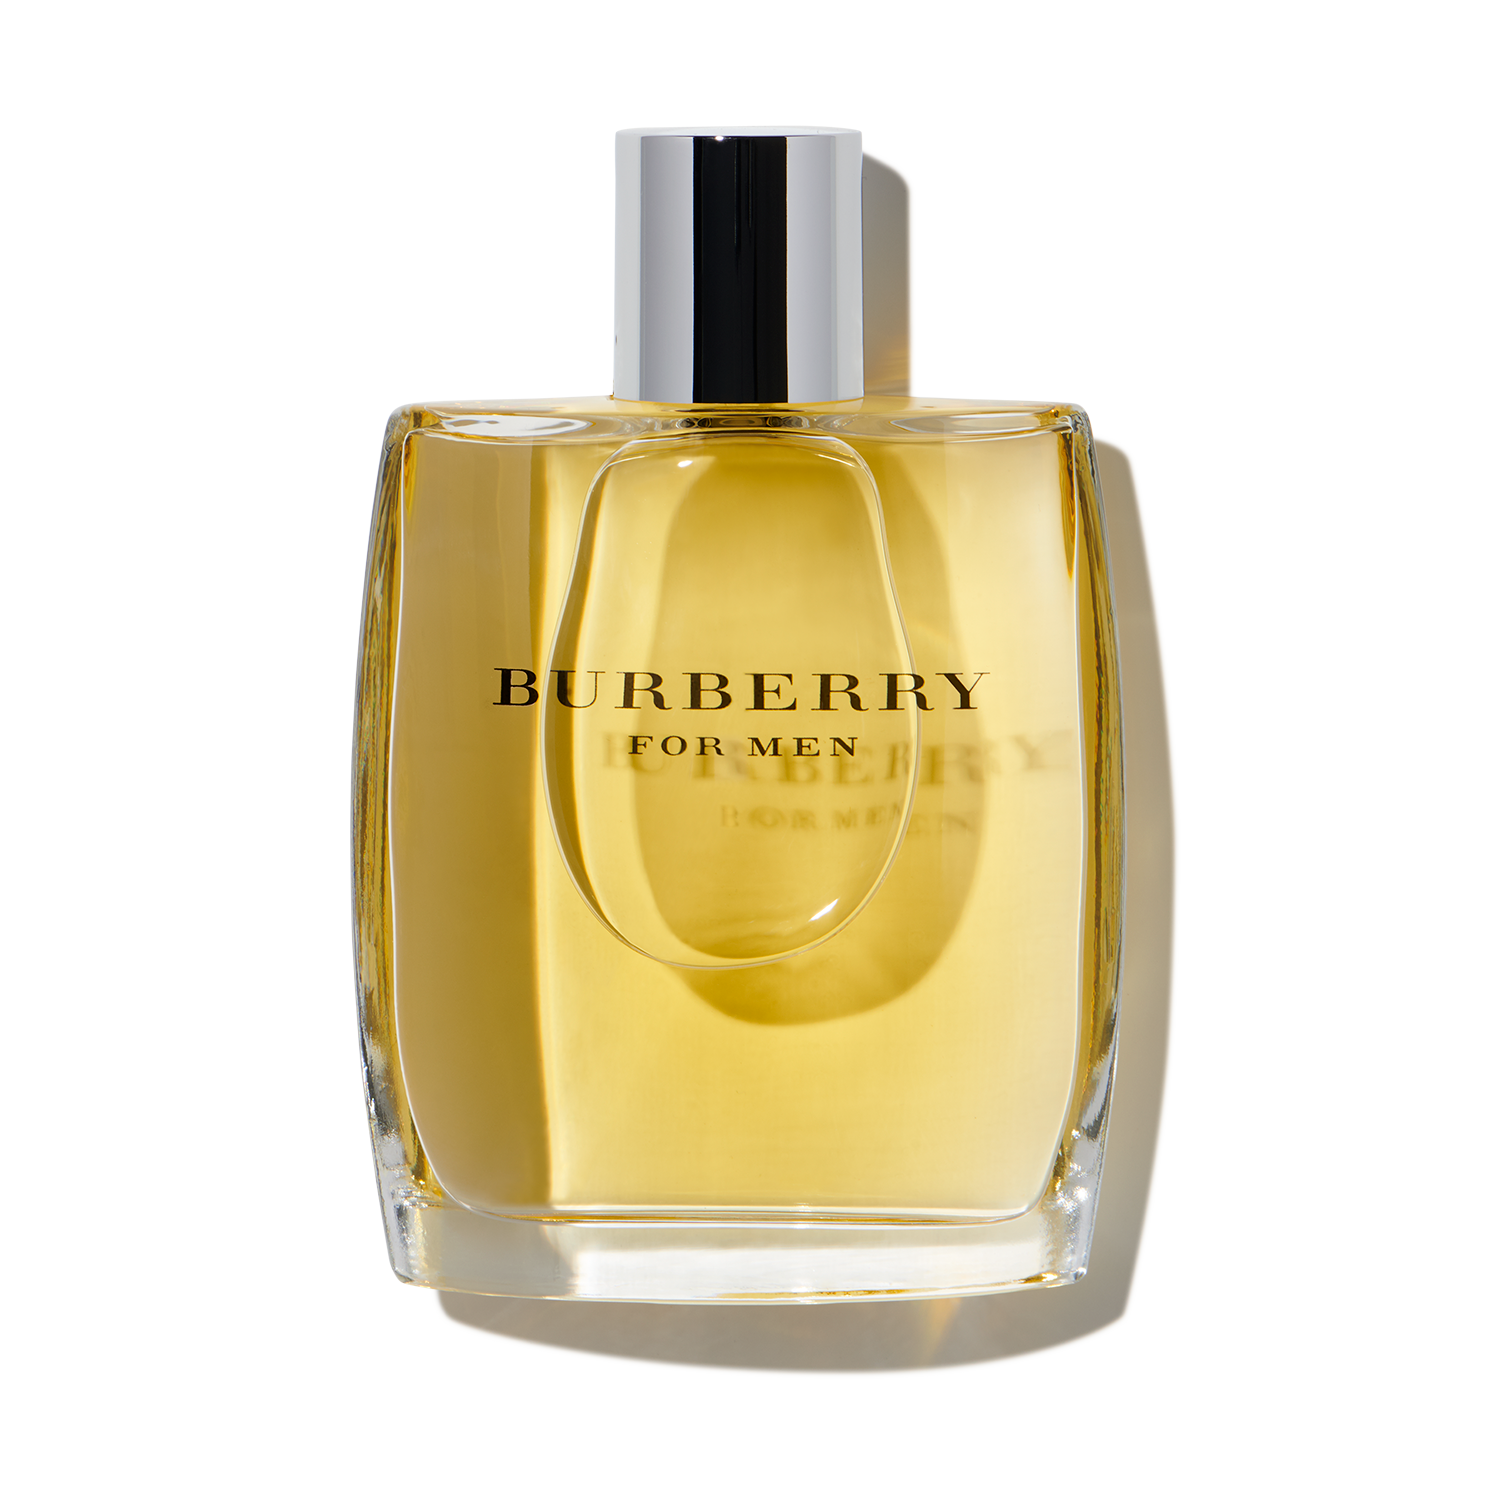 Burberry for Men EDT by Burberry $/month | Scentbird